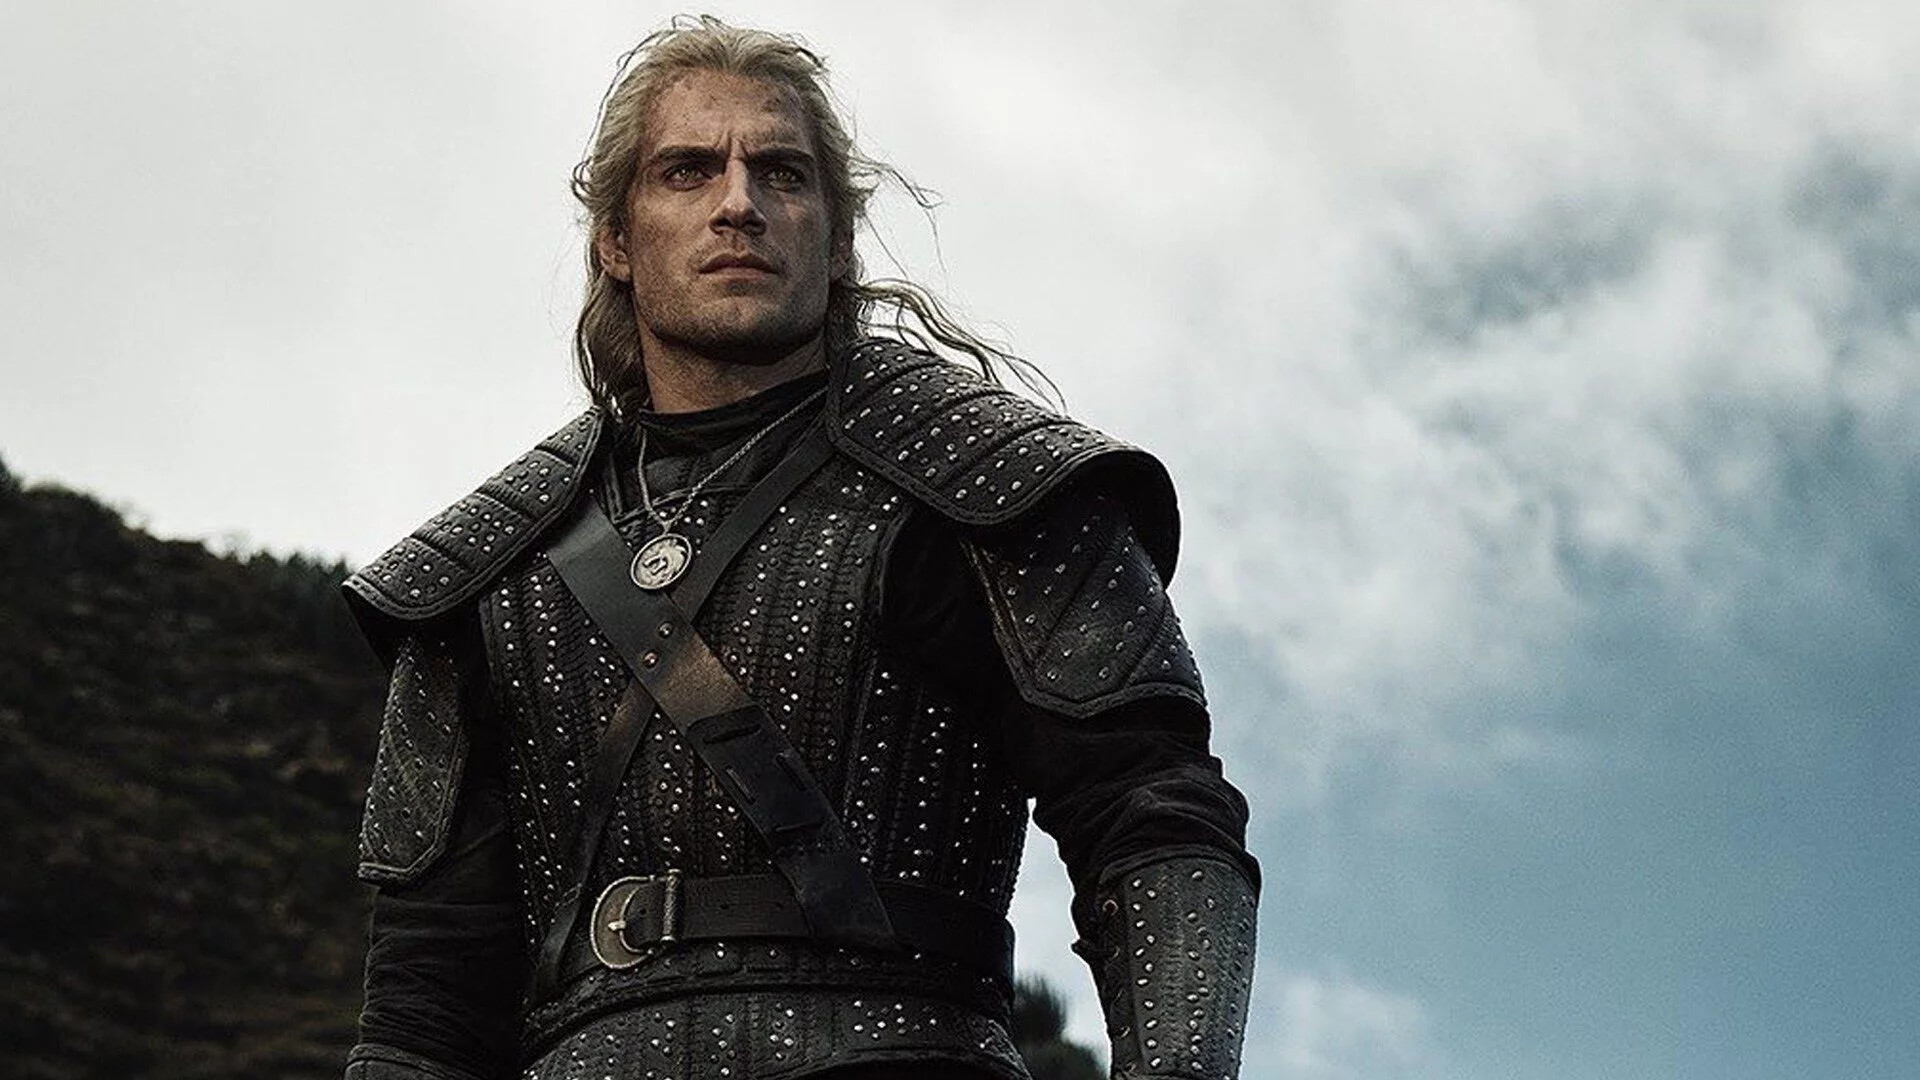 The Witcher (TV Series): An epic tale of fate and family, Netflix. 1920x1080 Full HD Background.